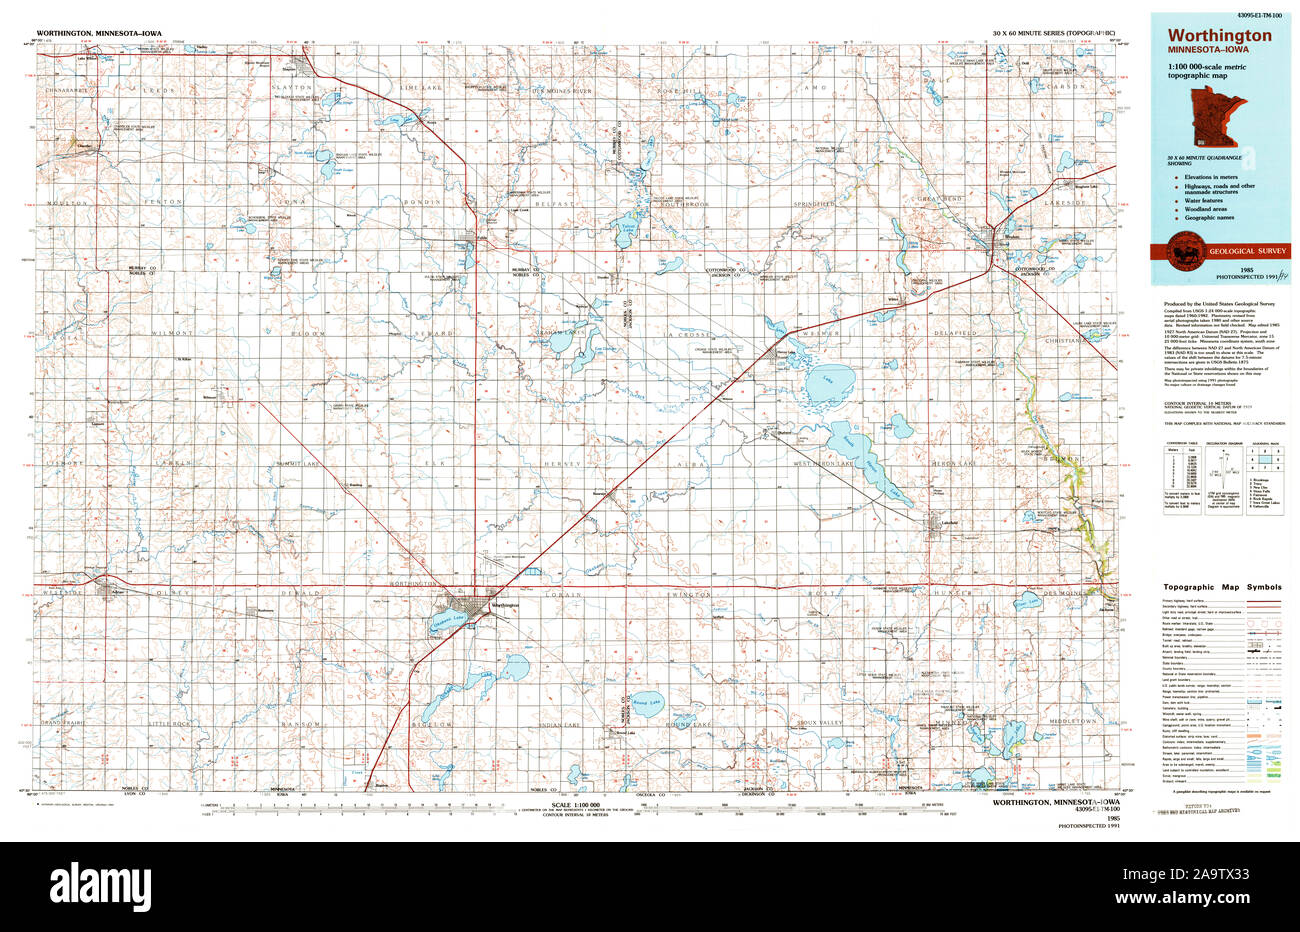 USGS Topographic Map FORT COLLINS Colorado 1980-100K 30 by 60 minutes 